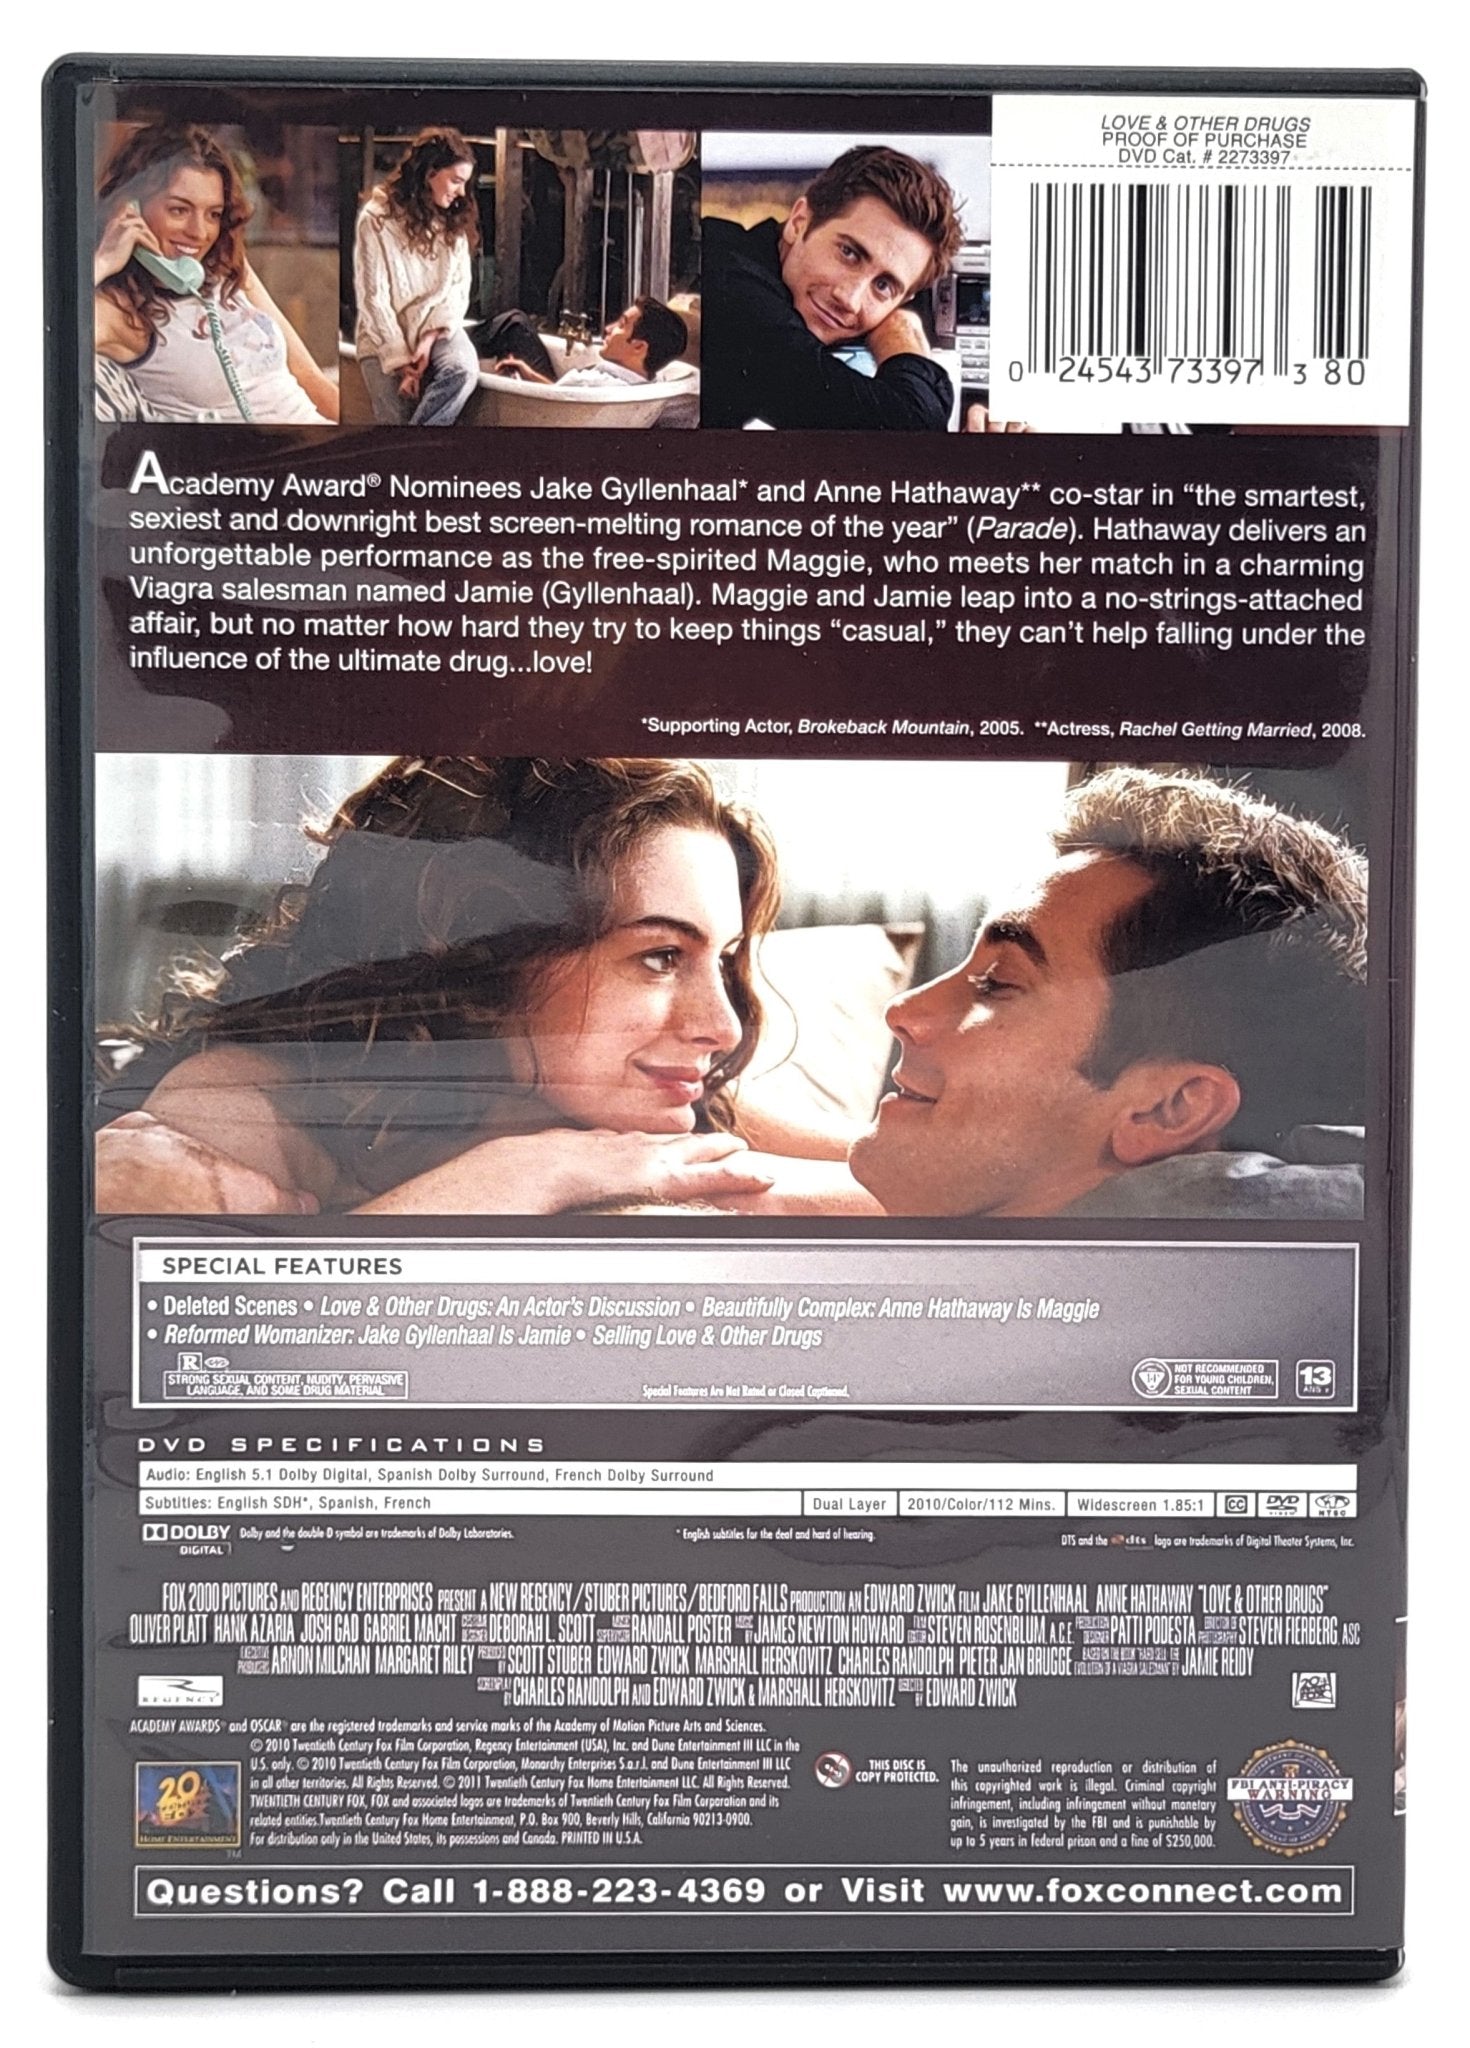 20th Century Fox Home Entertainment - Love & Other Drugs | DVD | Widescreen - DVD - Steady Bunny Shop